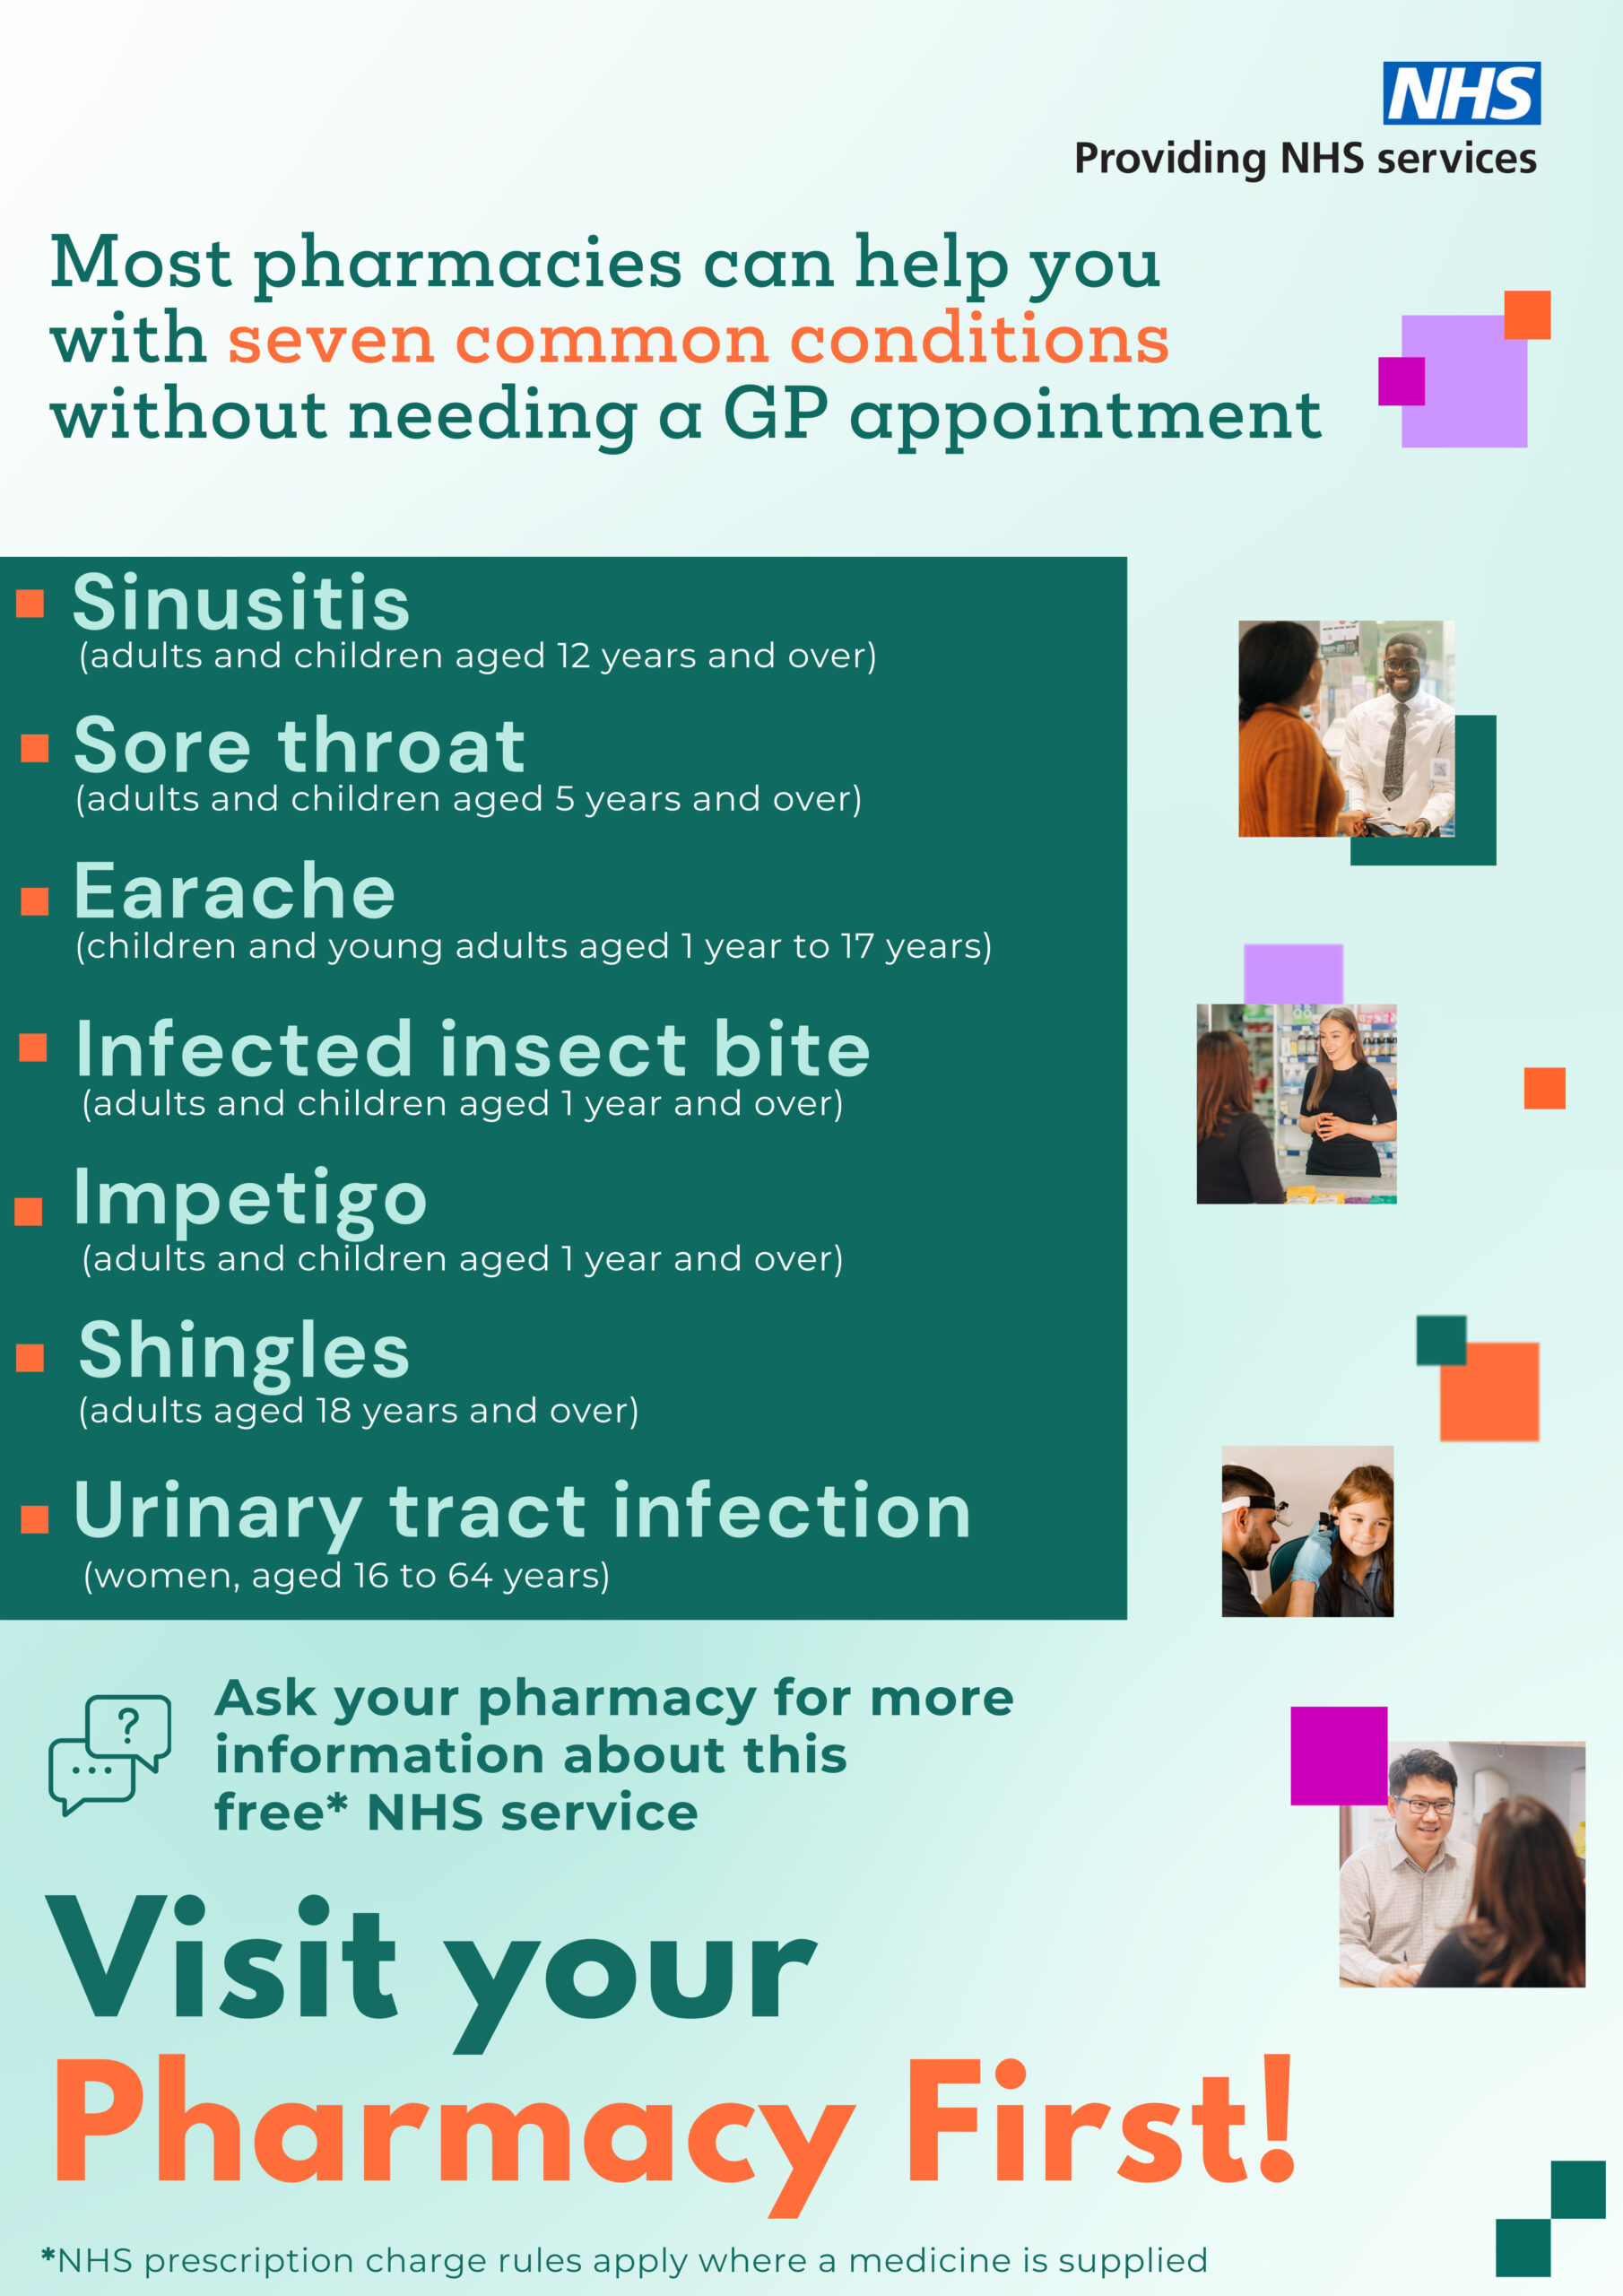 Pharmacy first poster